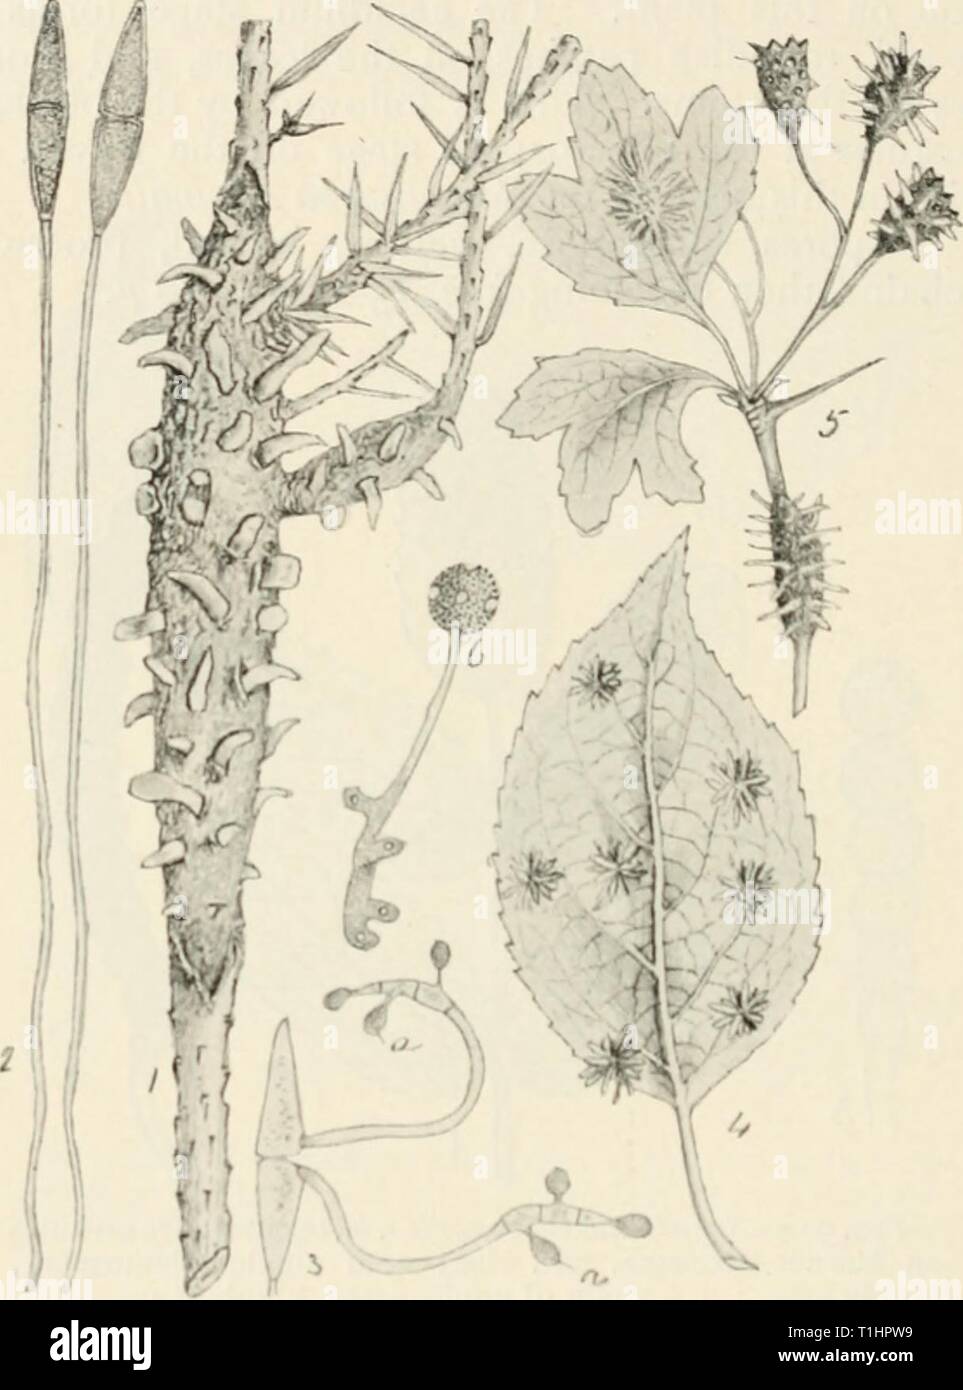 Diseases of cultivated plants and Diseases of cultivated plants and trees  diseasesofcultiv00massuoft Year: [1910?]  3l6 DISEASES OF CULTIVATED PLANTS country); i-septate, rarely 2-septate, each cell having two or four germ-pores. Spermogoniaand aecidia on a different host to teleutospores. Uredospores unknown.    F'lG. 95.—Gymttoiporangium clavariacforme. I, teleutospore stage on juniper branch; 2, teleutospores; 3, teleutospores ger- minating and producing secondary spores, (7, a ; 4, aecidium stage on pear leaf ; 5, aecidium stage on branch, leaves, and fruit of hawthorn ; 6, aecidiospore g Stock Photo